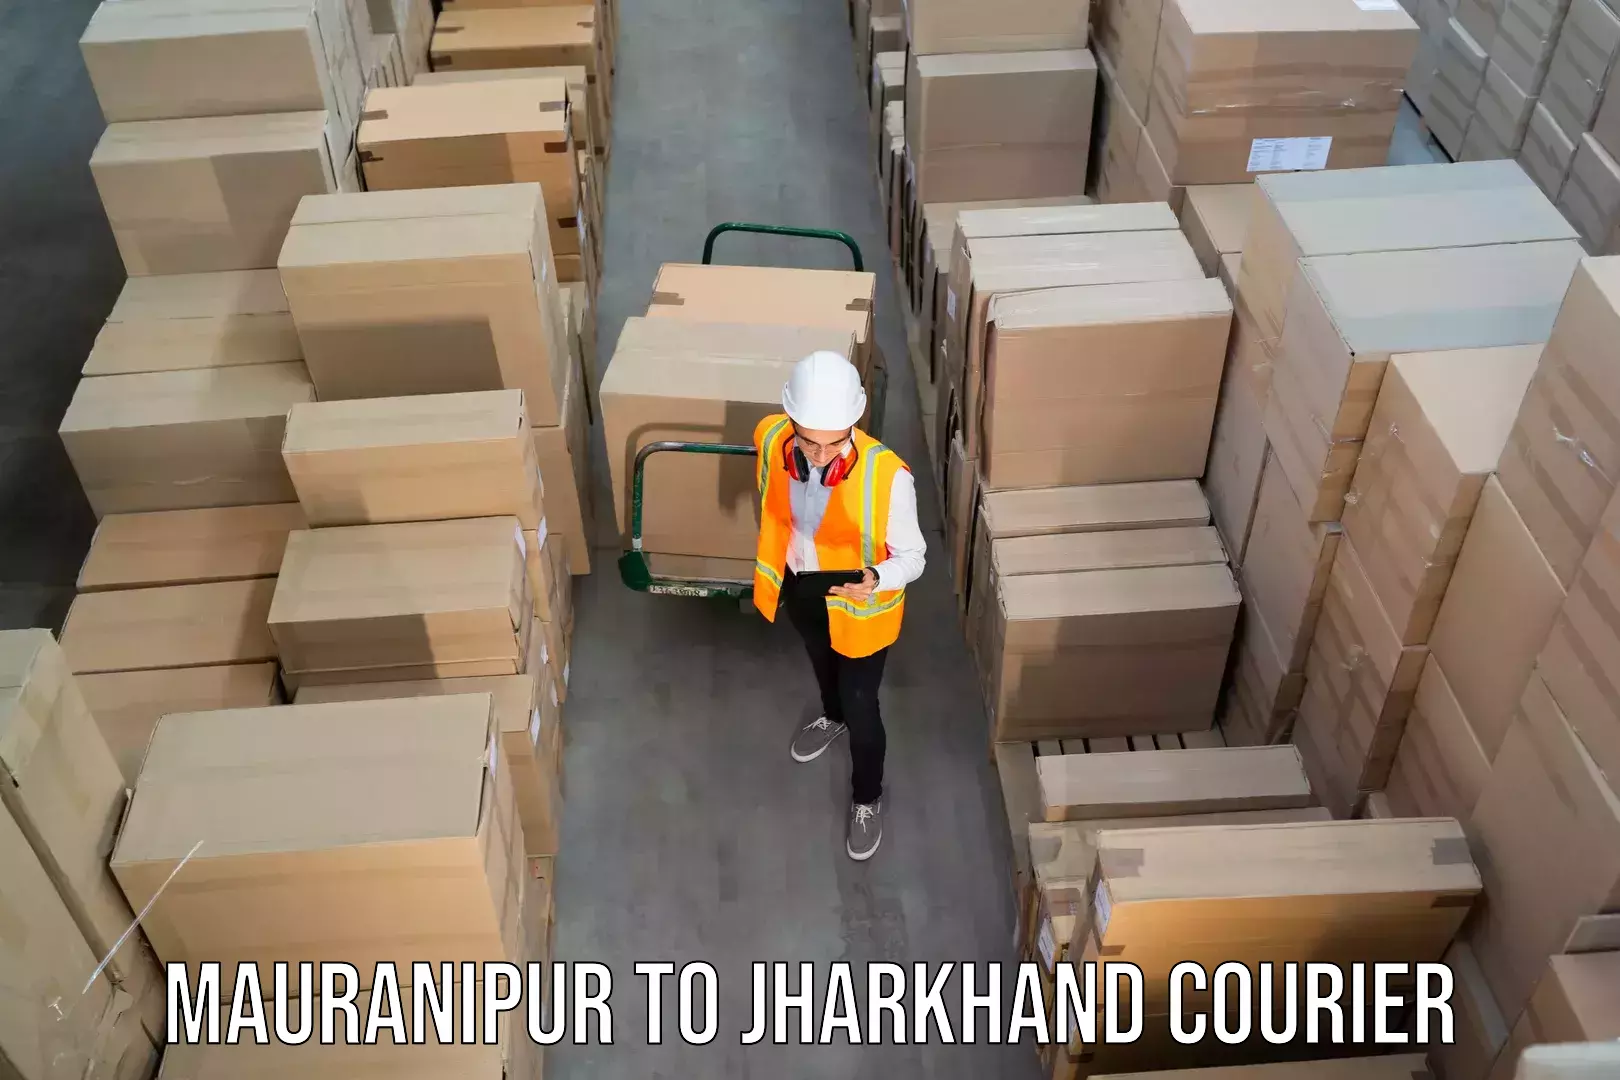 On-call courier service Mauranipur to Topchanchi